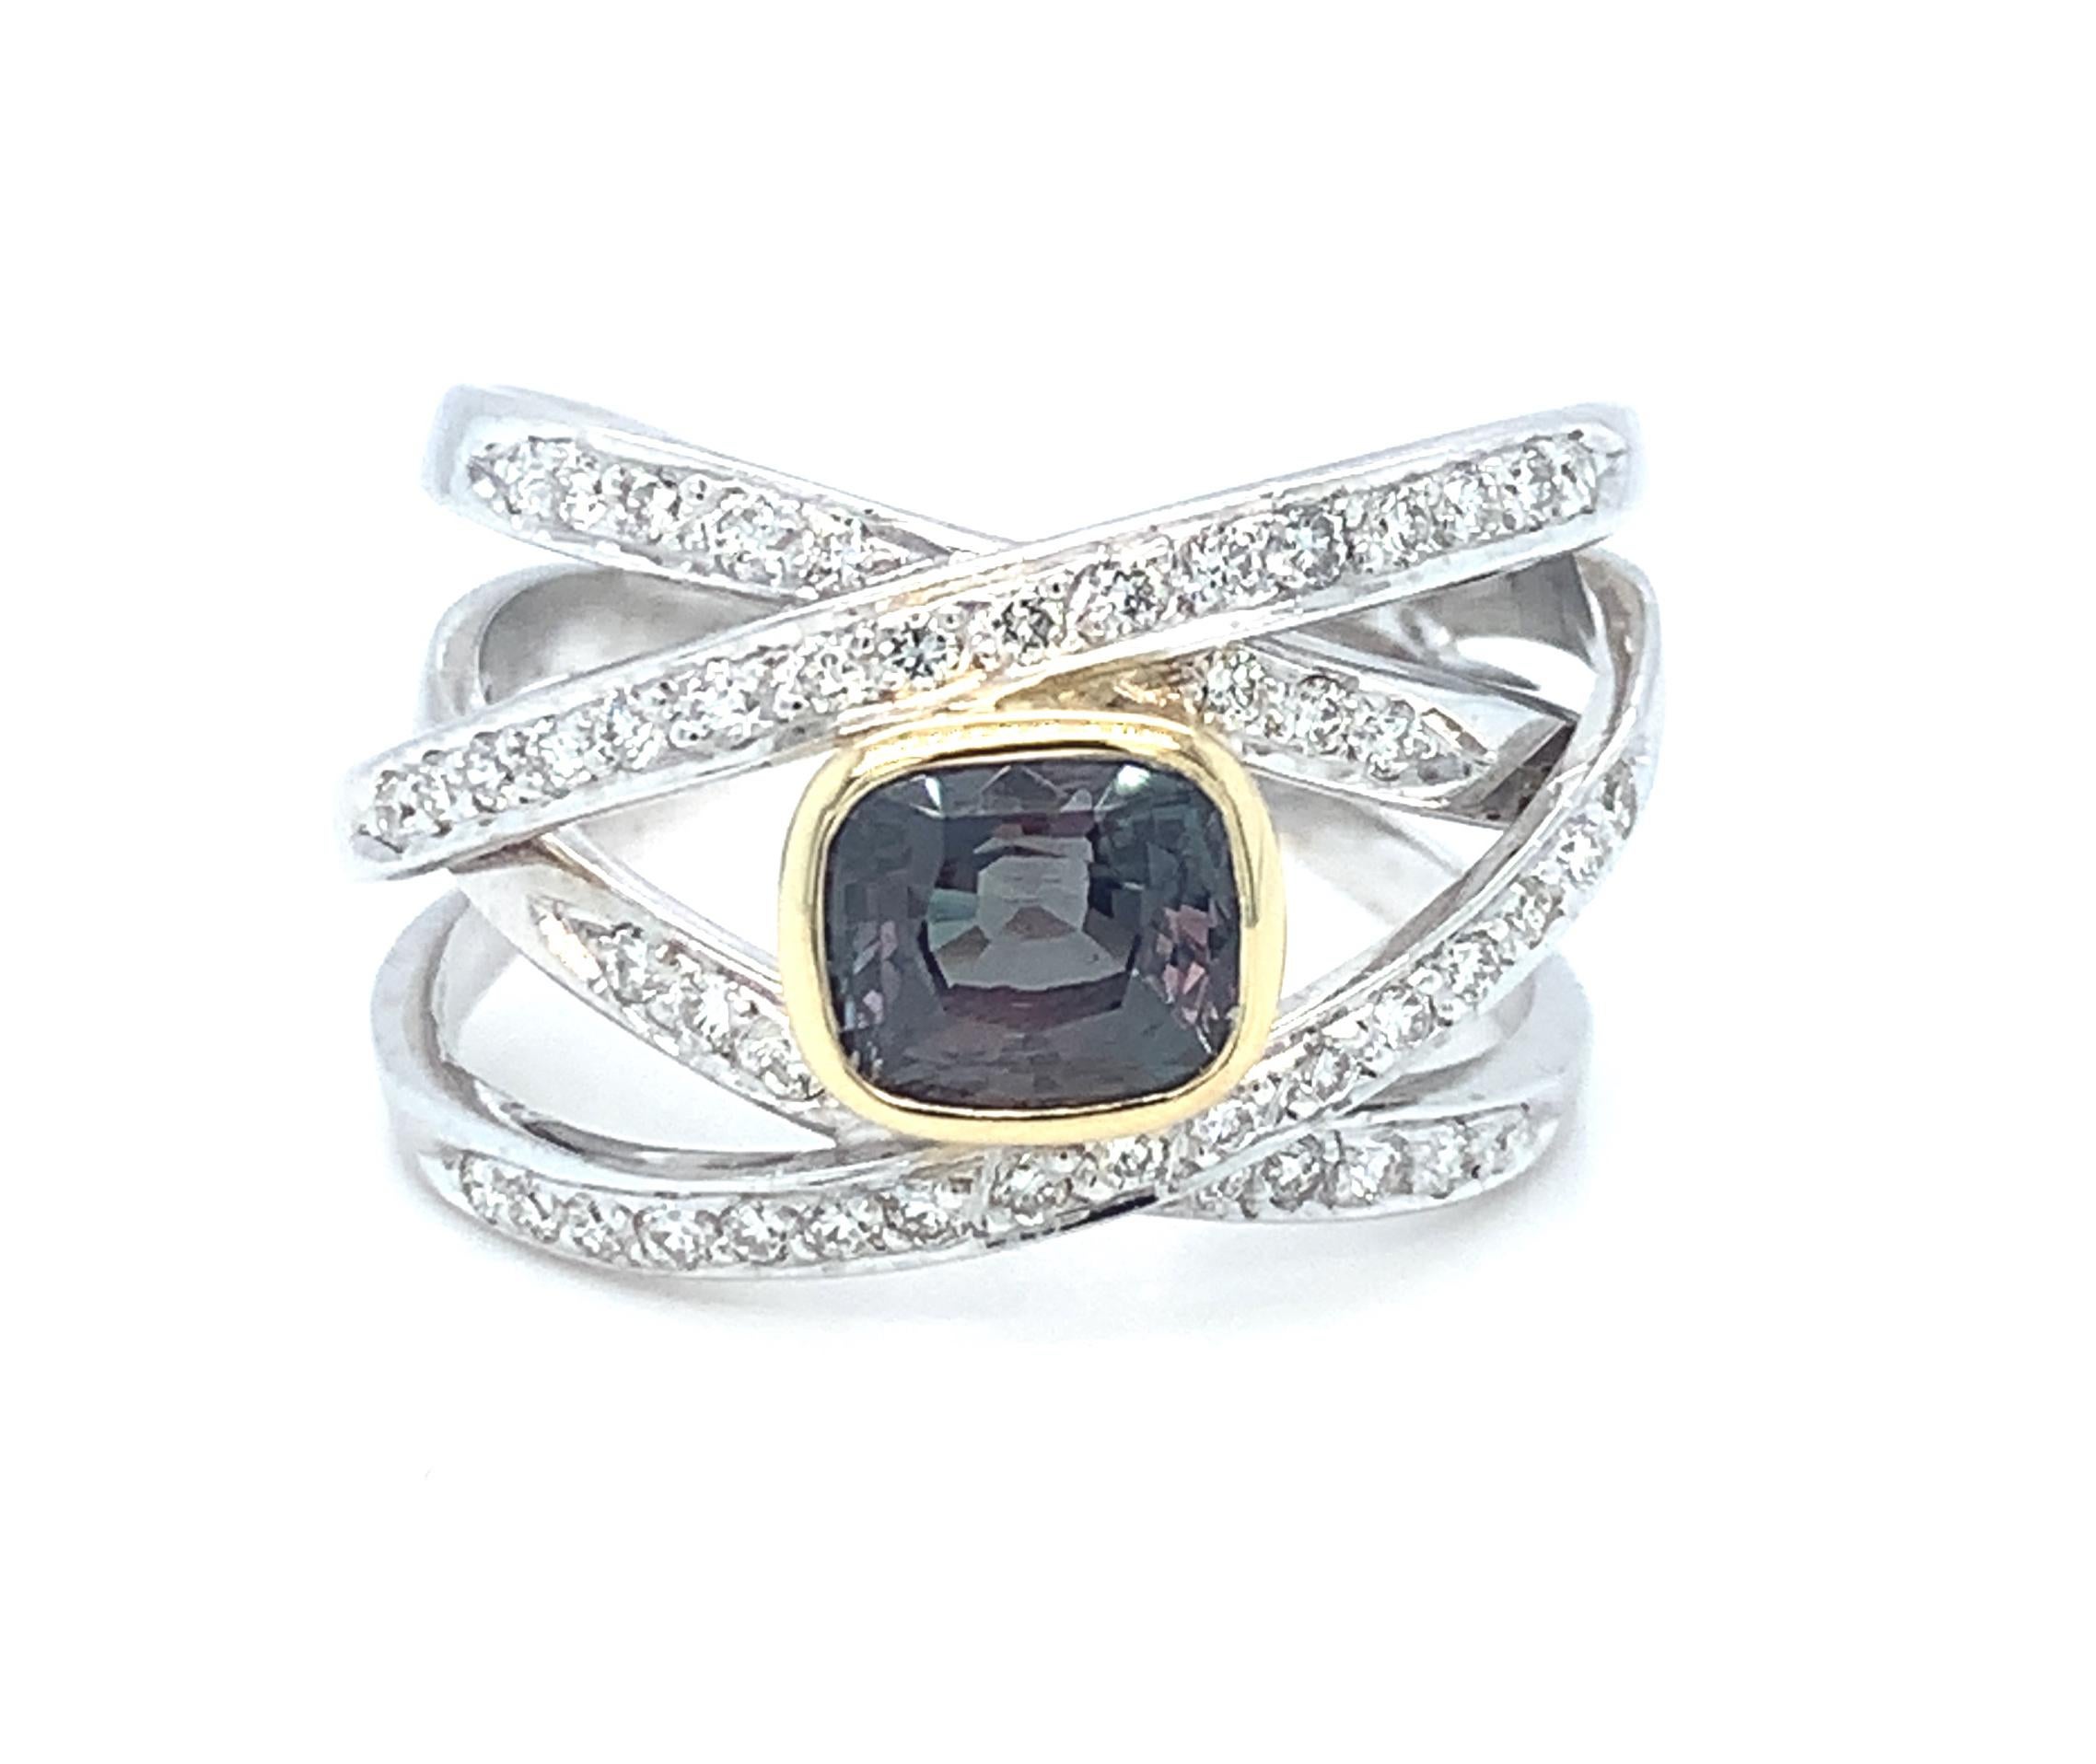 Cushion Cut 1.58 Carat GIA Certified Alexandrite and Diamond Cocktail Ring in 18k Gold For Sale